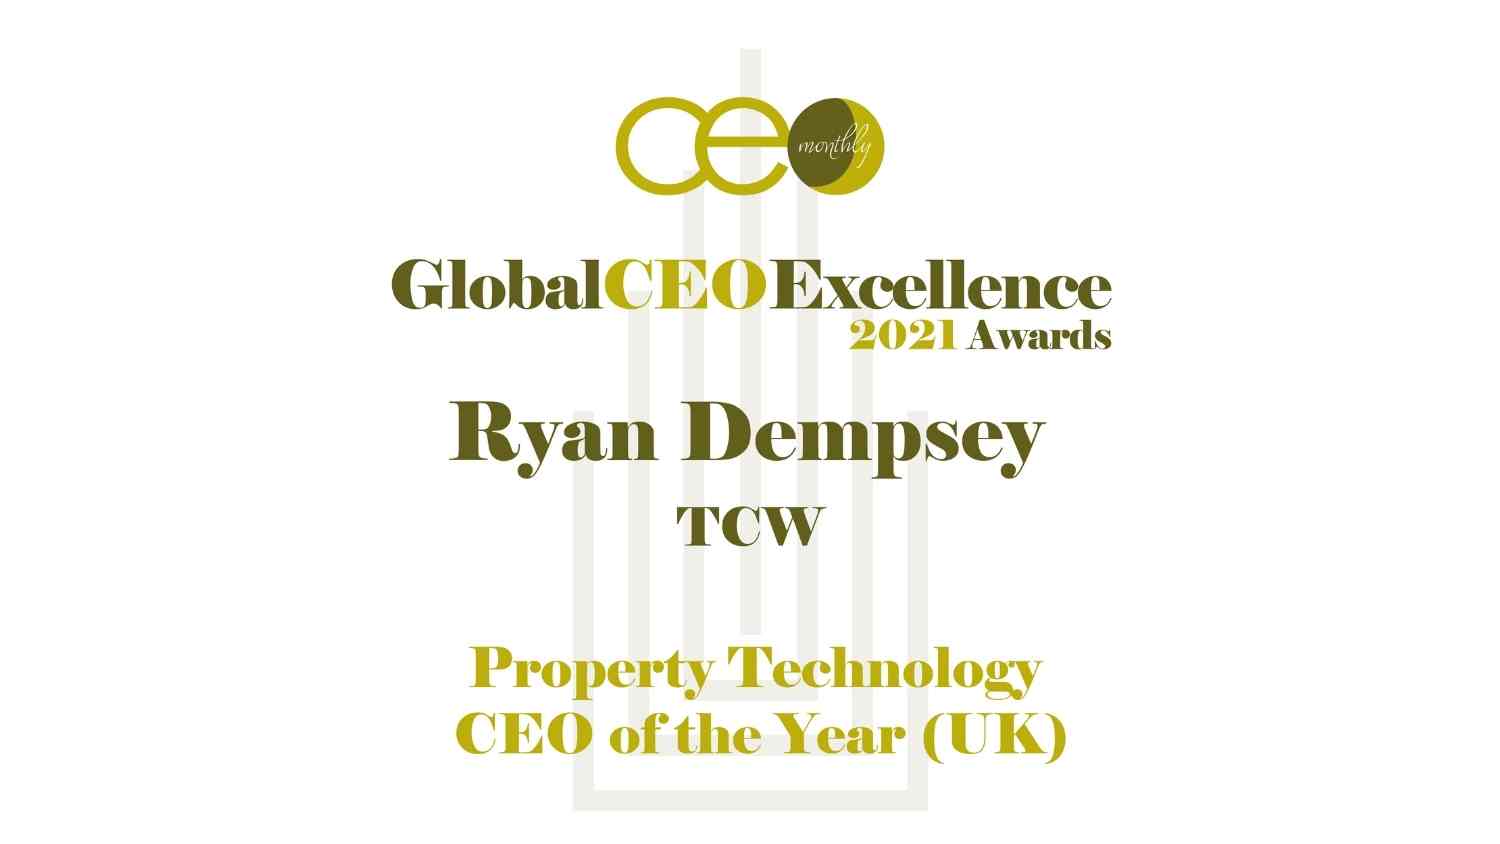 Property Technology CEO of the Year (UK): Ryan Dempsey